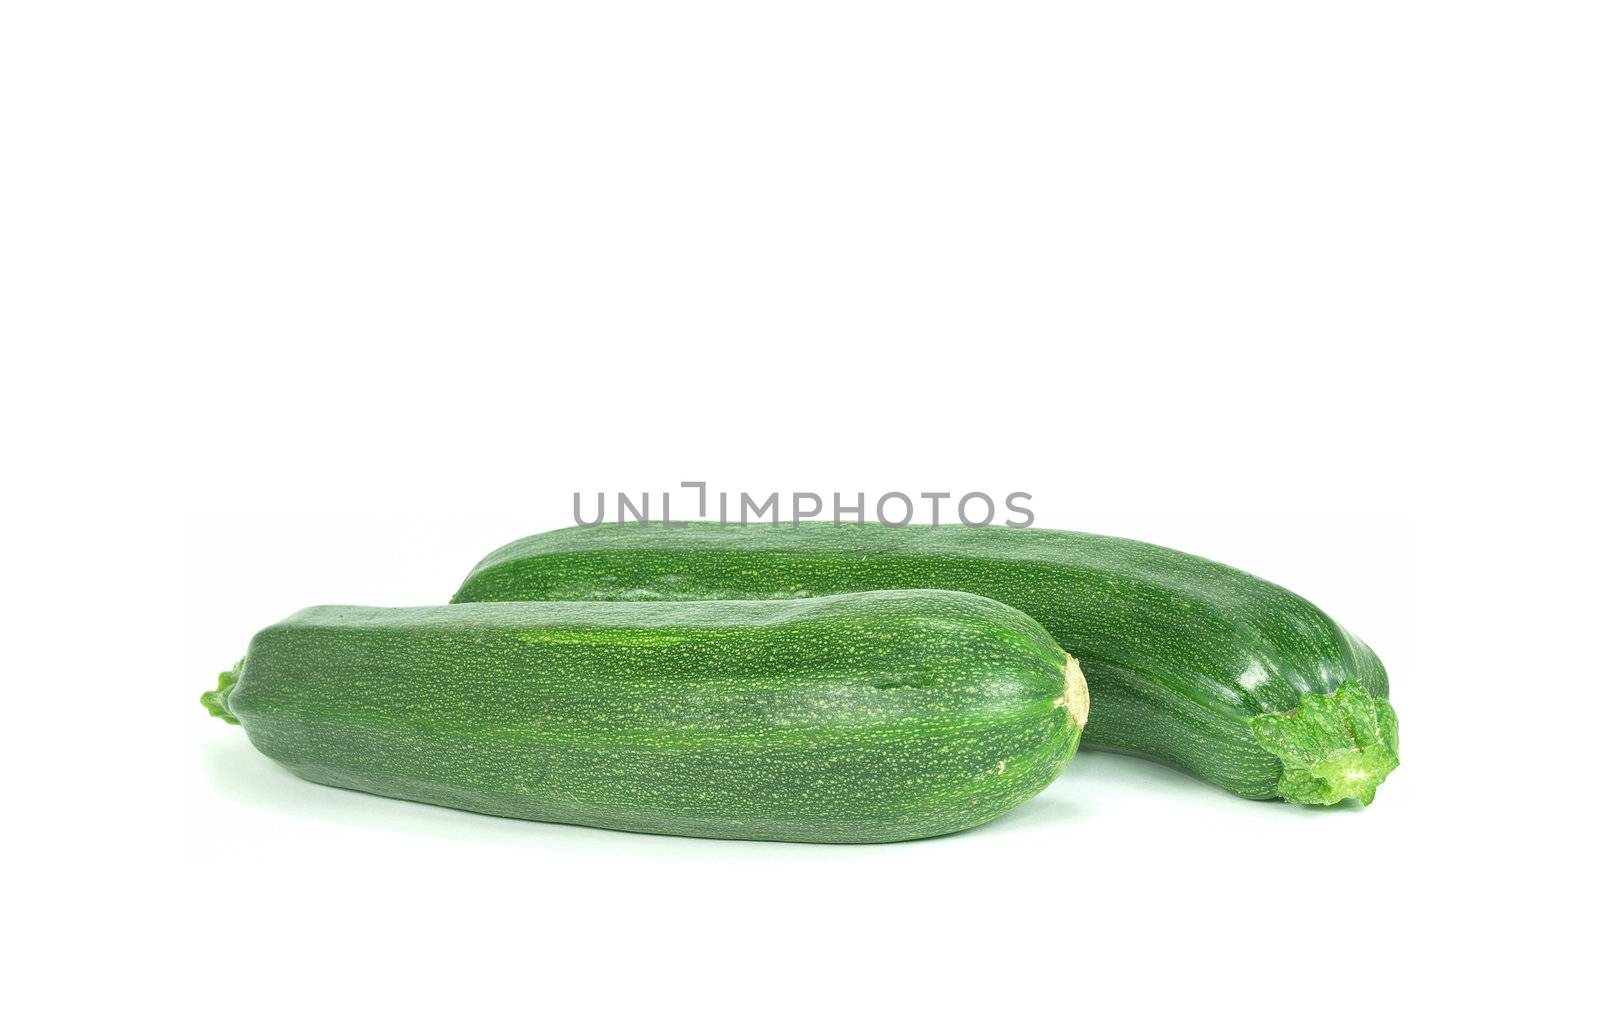 two fresh and green courgettes on white background